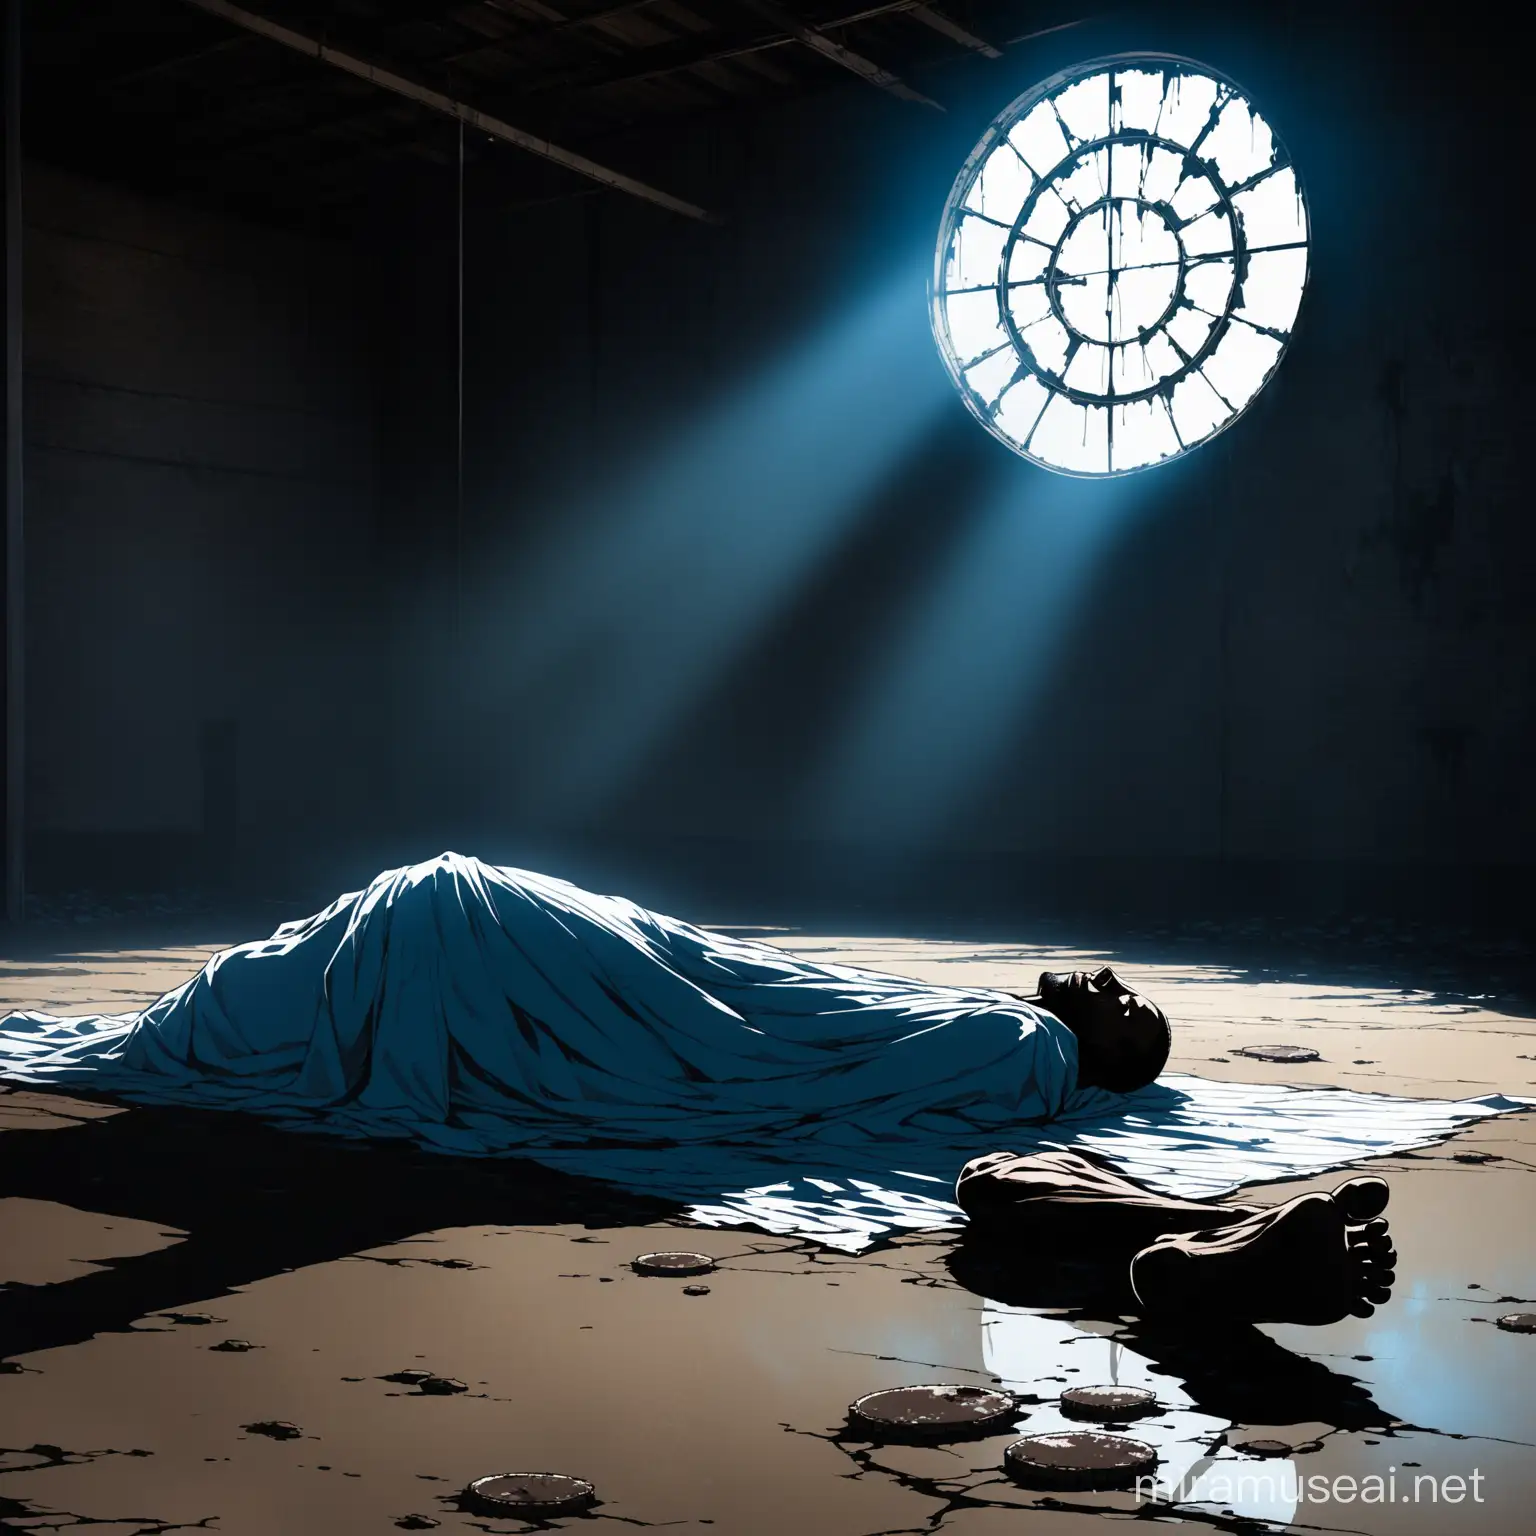 Abandoned Warehouse Scene with Deceased African American Man and Glowing Blue Circle